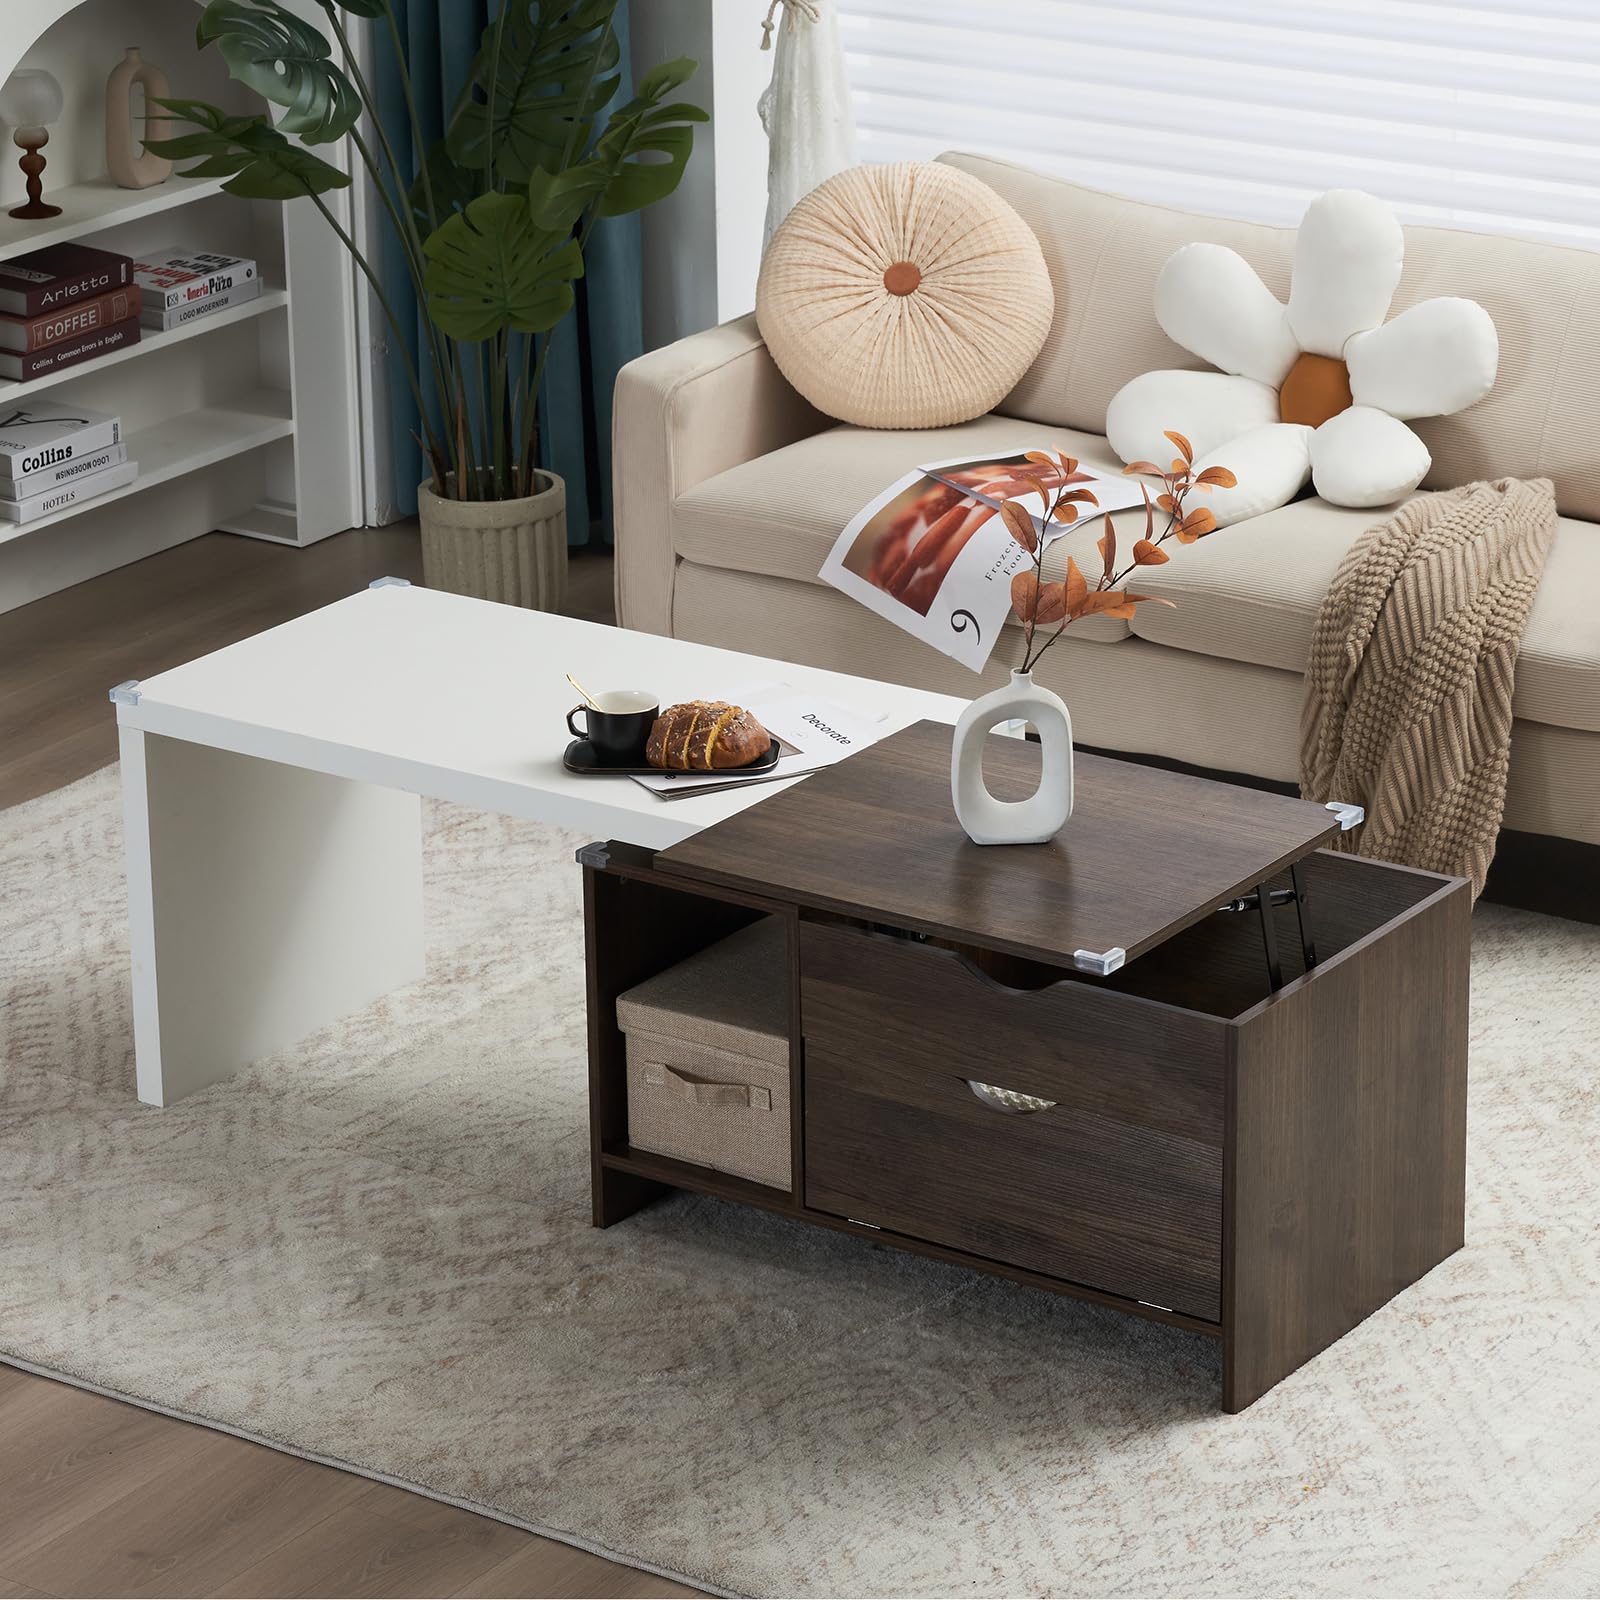 59" L Large Wood Coffee Table with Storage, Modern Extendable Transformer Table Lift Top Center Table for Living Room